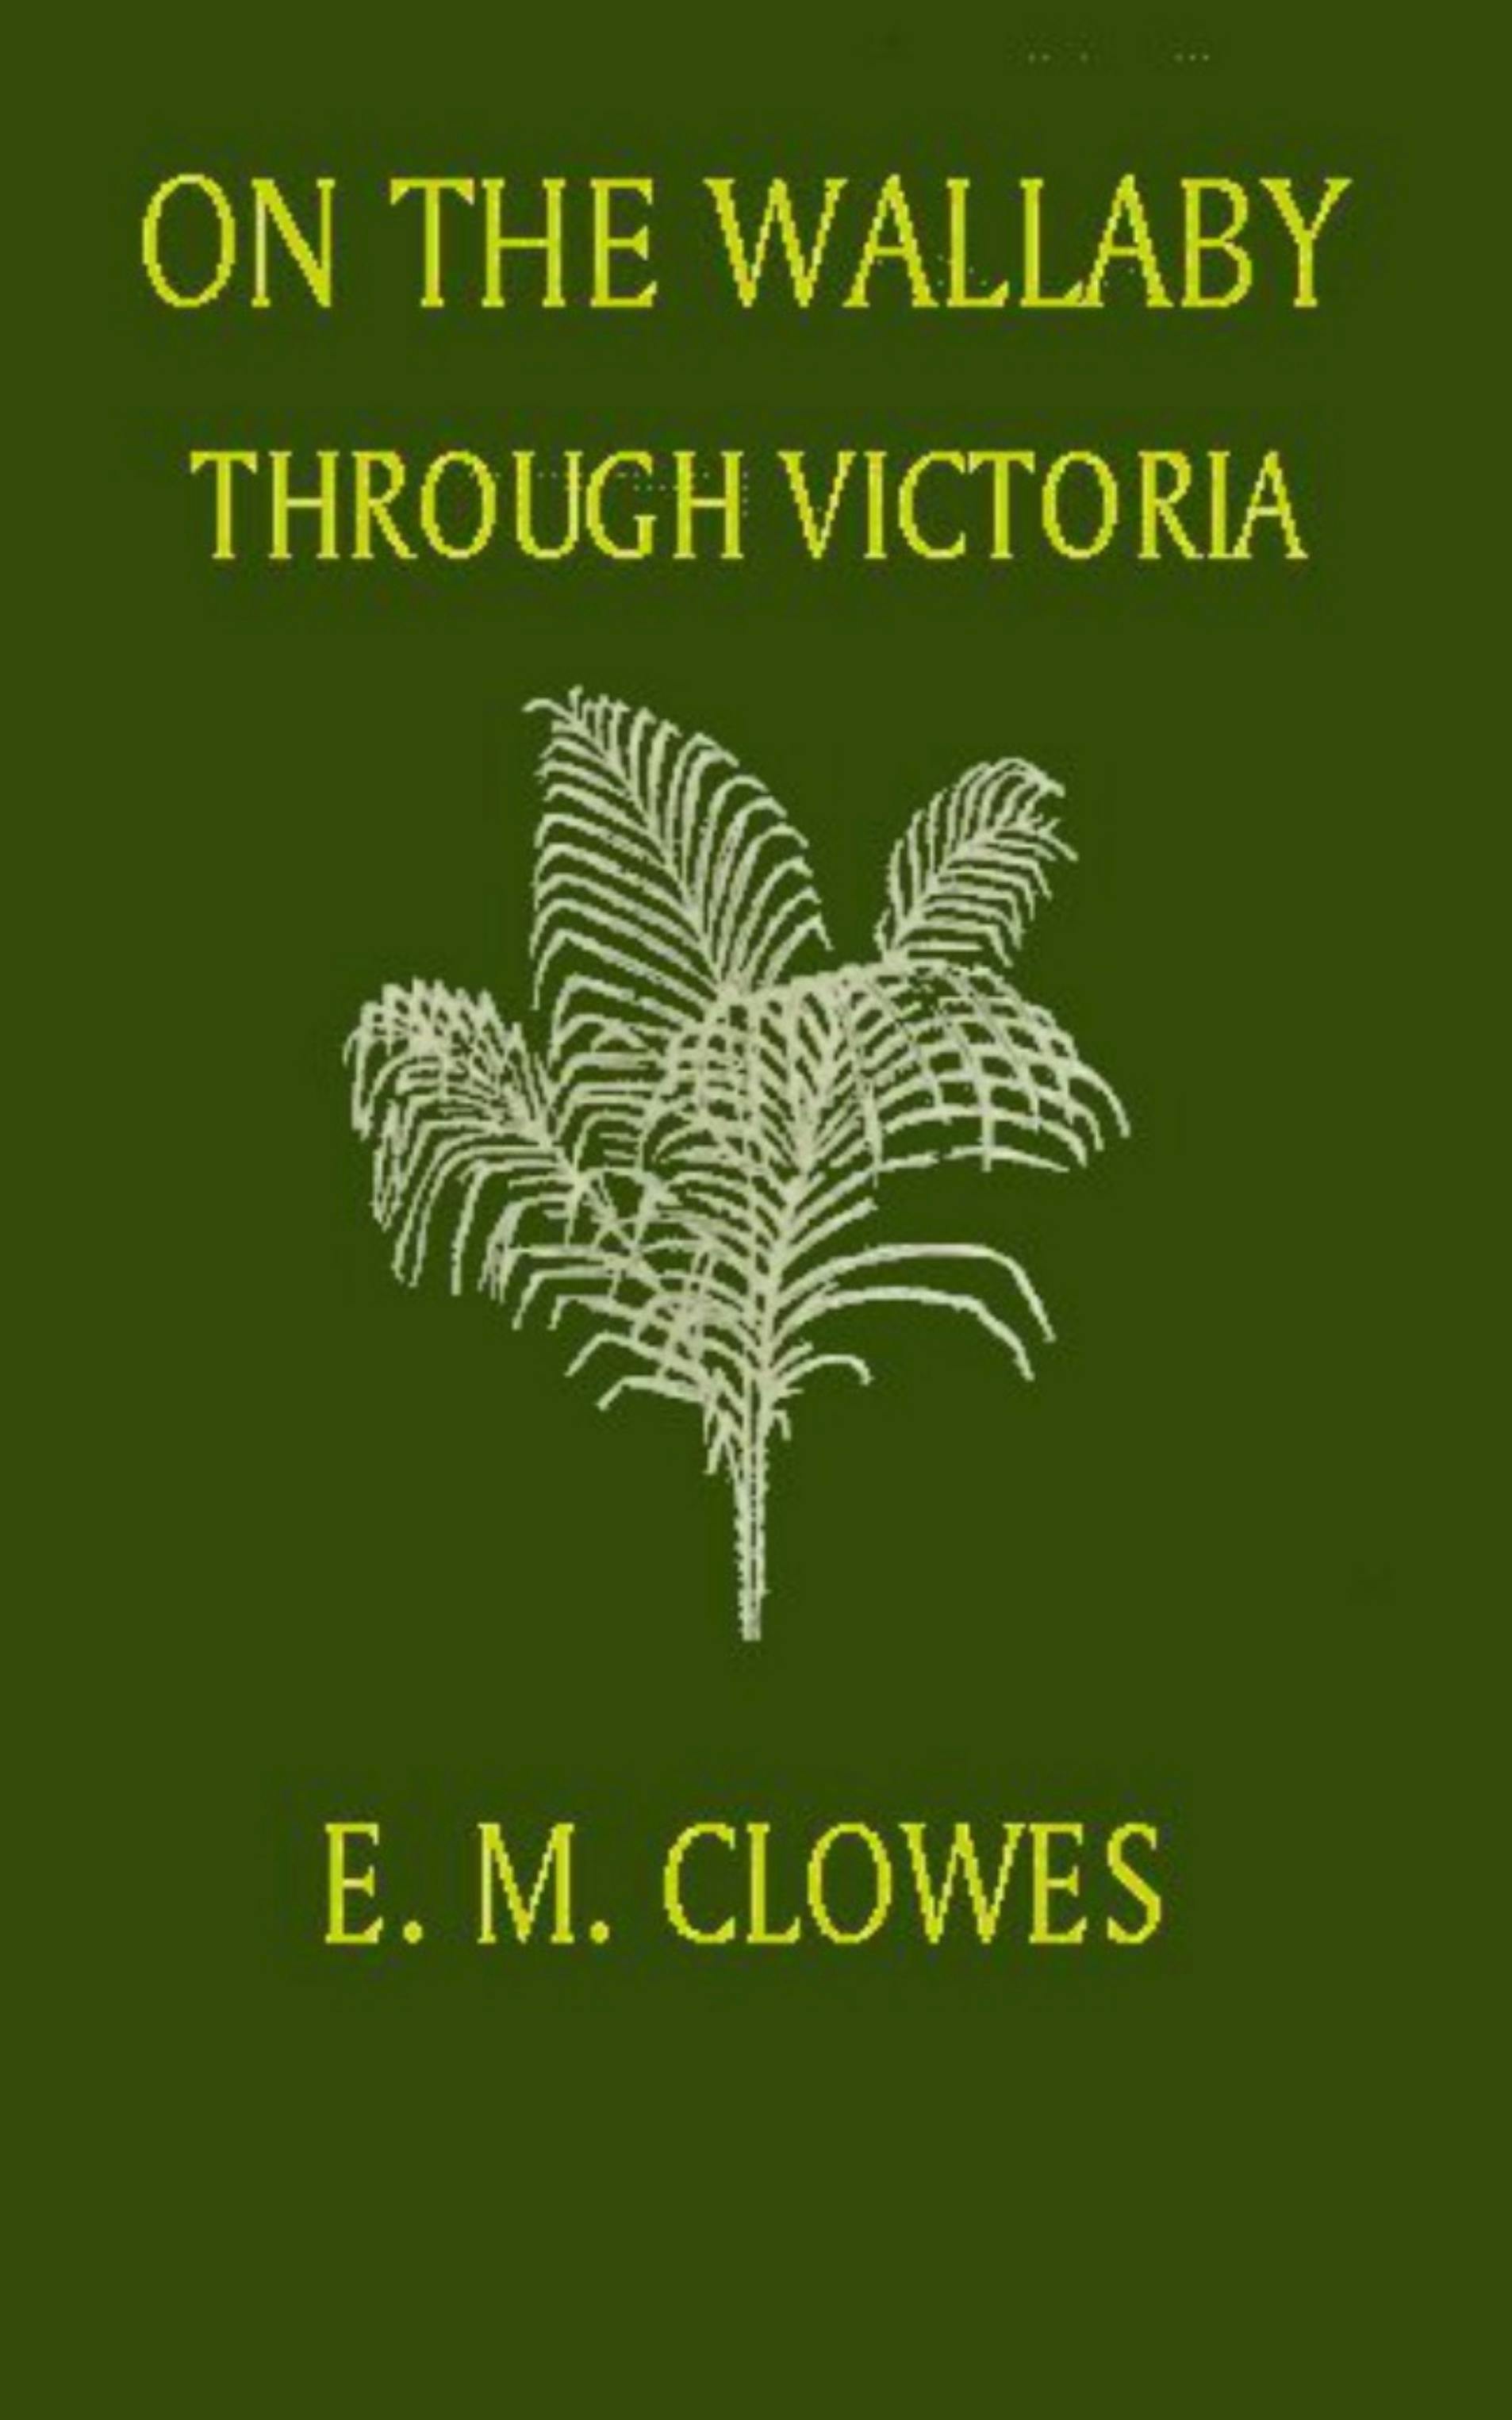 On the Wallaby through Victoria - E. M. Clowes